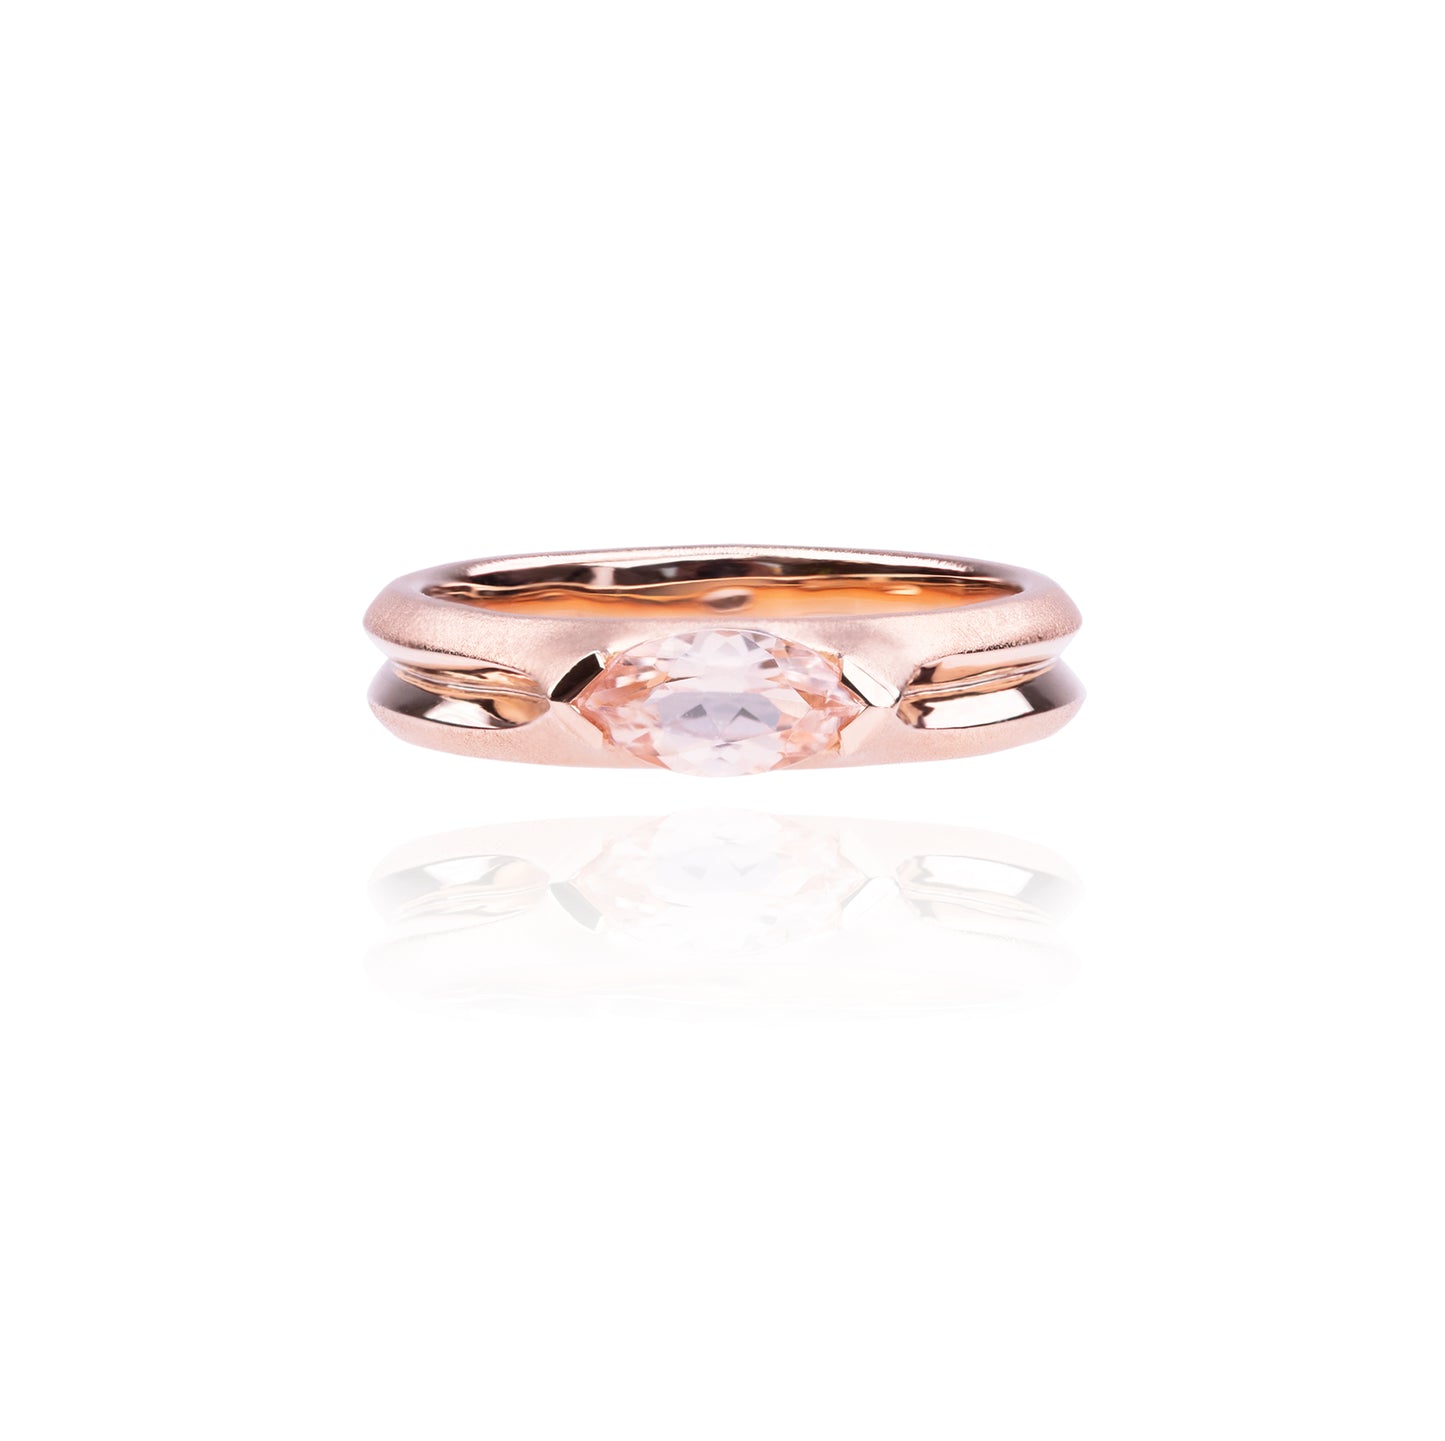 Orme-Brown Contemporary Fine Jewellery Engagement Ring Recycled Rose Gold Marquise Peach Sapphire Ethical Sustainable